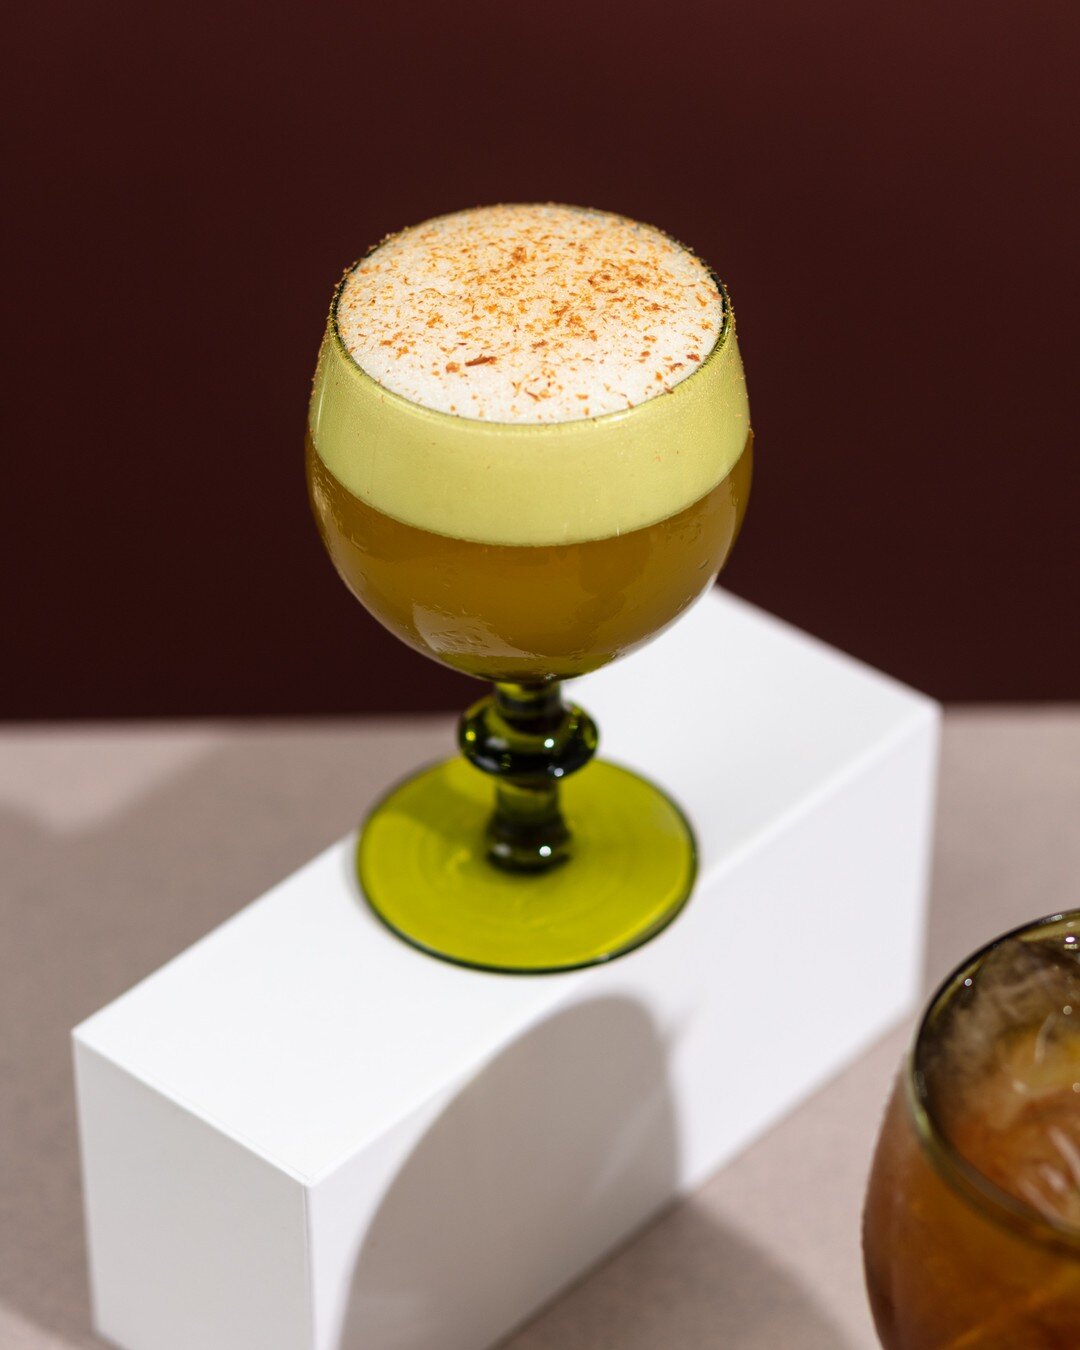 Harvest Sour
-
1 egg white
.75 oz Lemon
.75 oz Simple
1 oz Lairds Apple Brandy
1 oz Michters Rye Whiskey

Combine all ingredients in a cocktail shaker and dry shake.  Add half a normandy cube and 1 kold draft cube and shake hard. Strain into a tradit